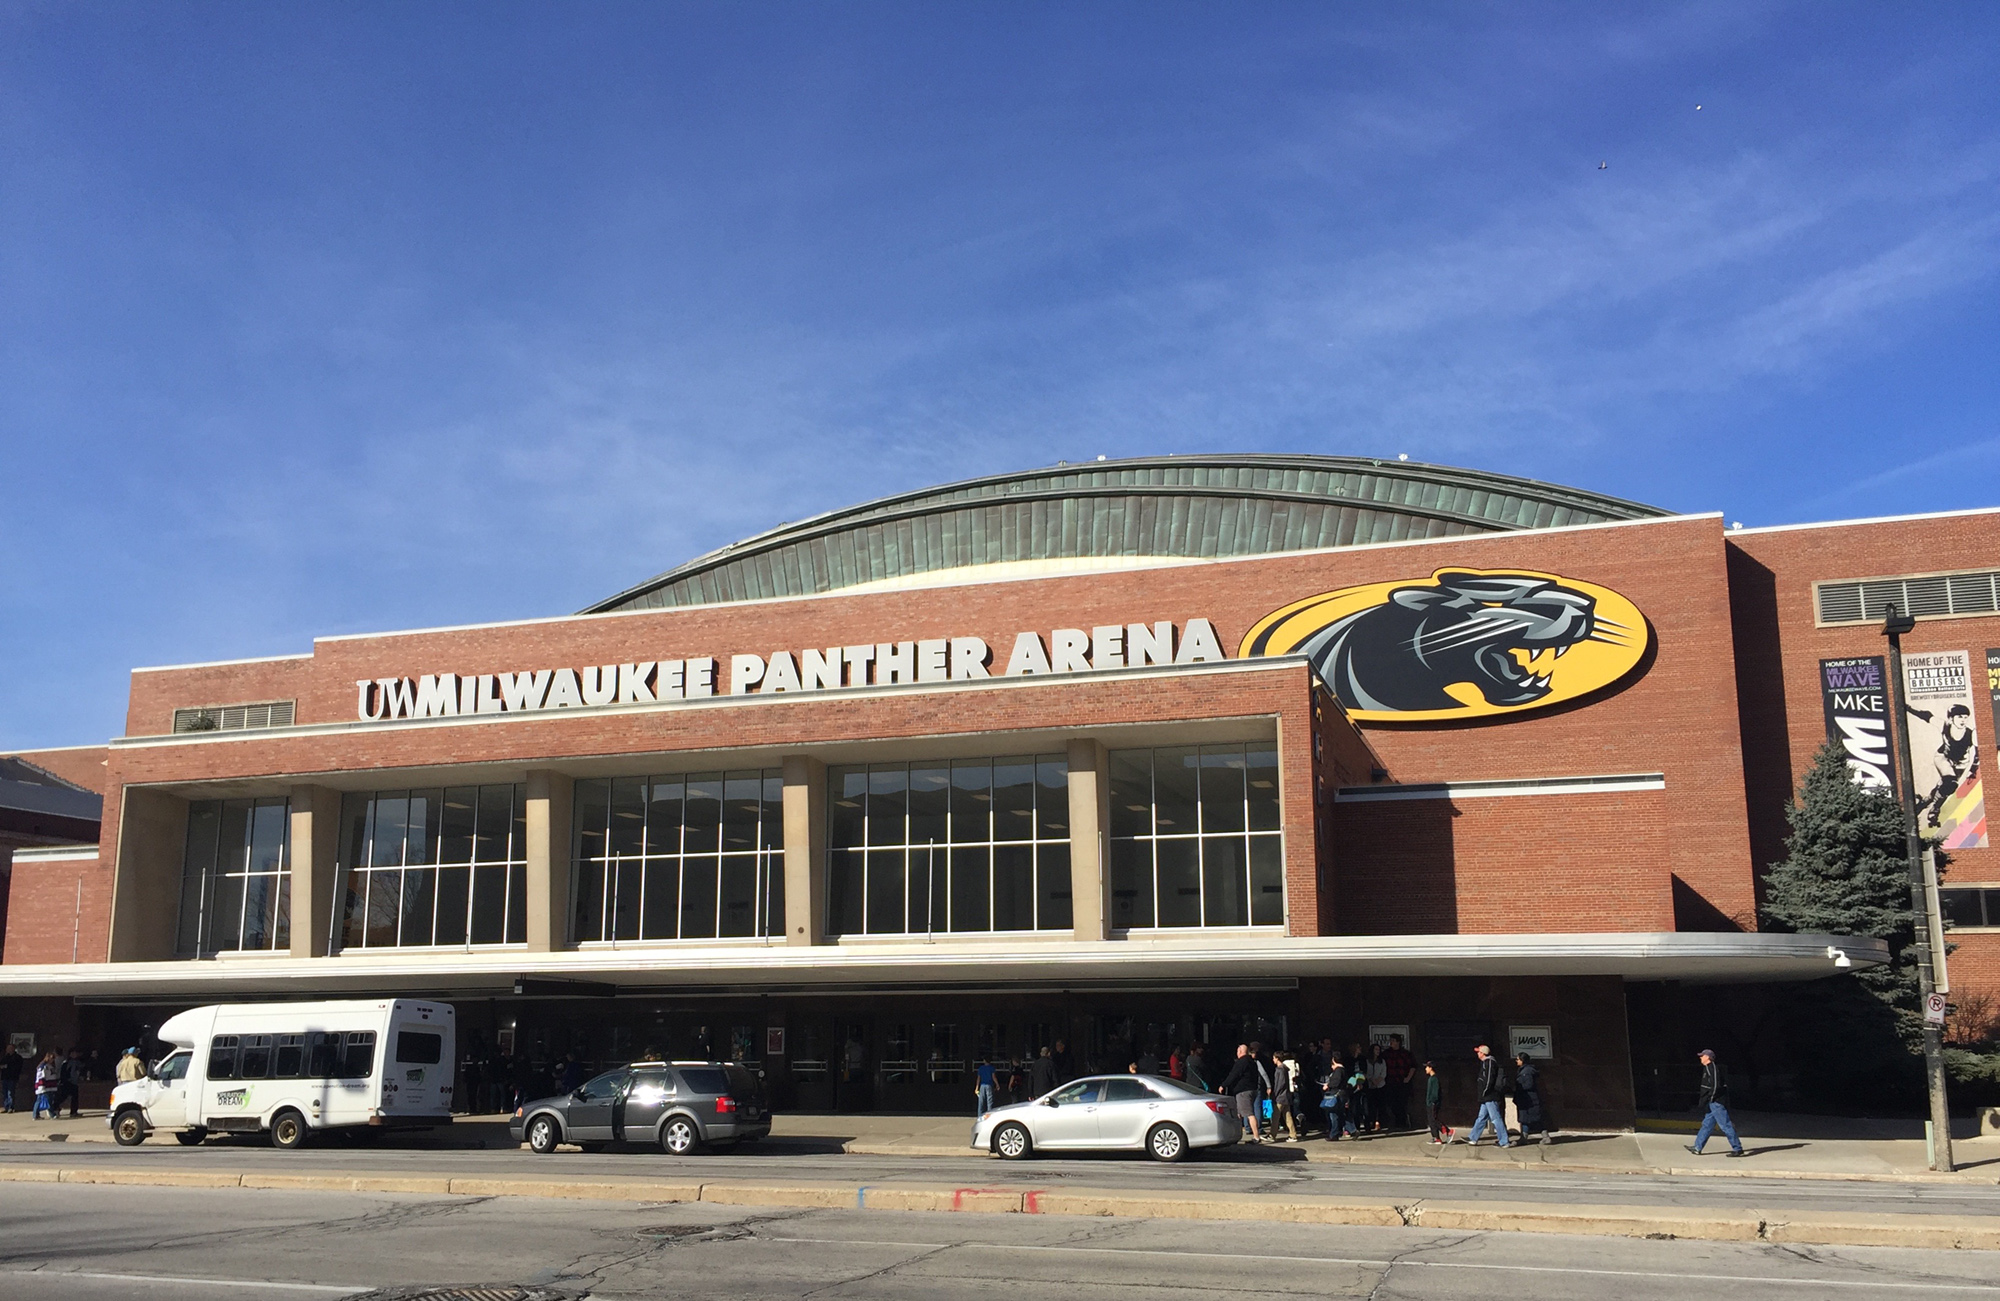 Ice installed for Admirals at their new home; the UW-Milwaukee